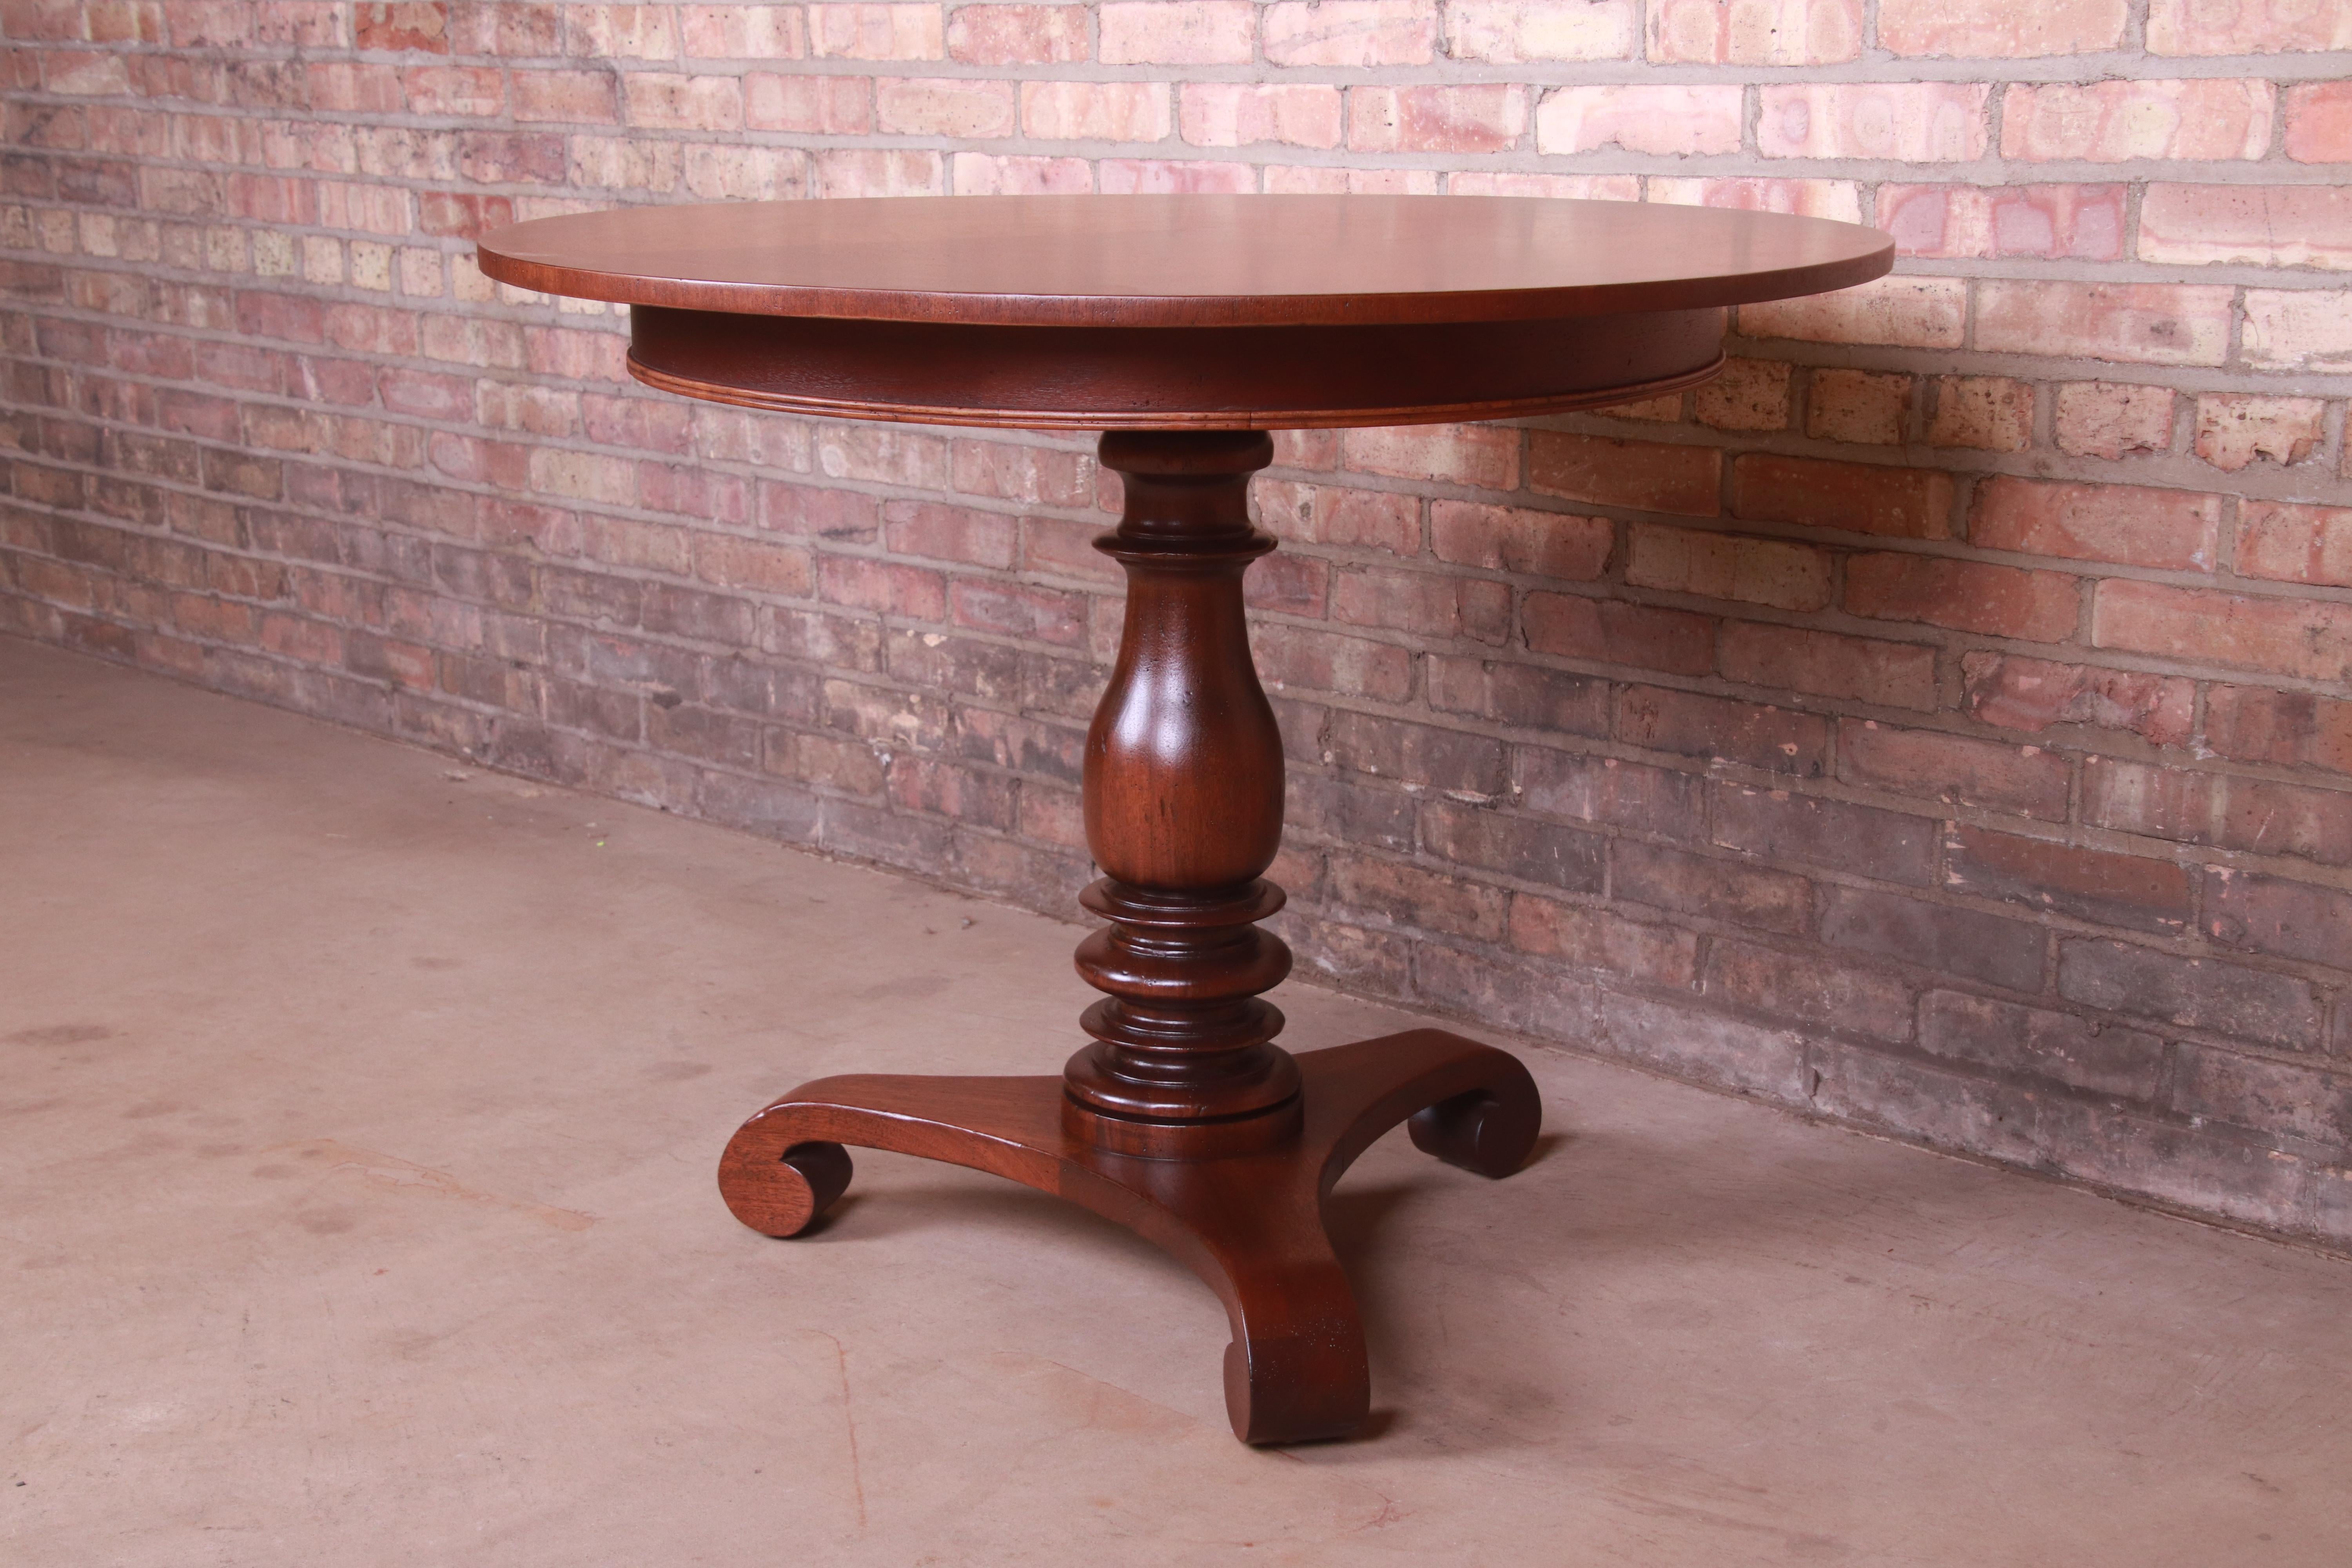 20th Century Baker Furniture Empire Mahogany Pedestal Tea Table or Center Table, Refinished